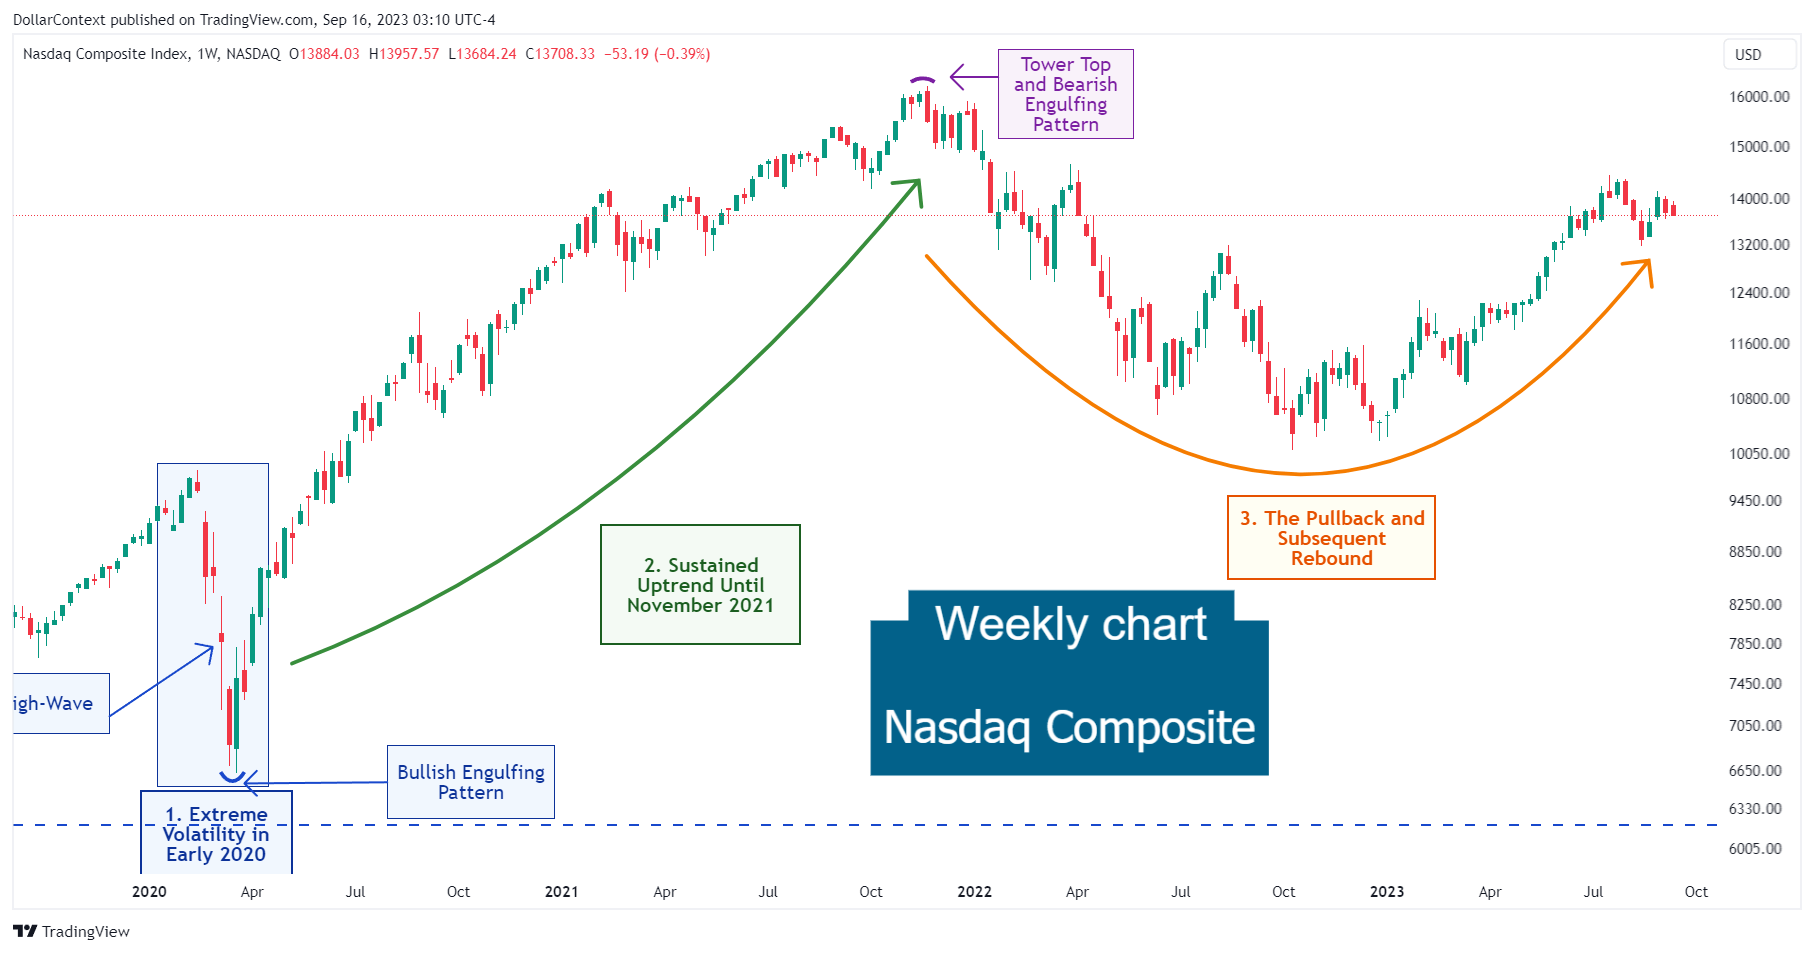 Nasdaq Composite: The Pullback and Subsequent Surge (Weekly Chart)